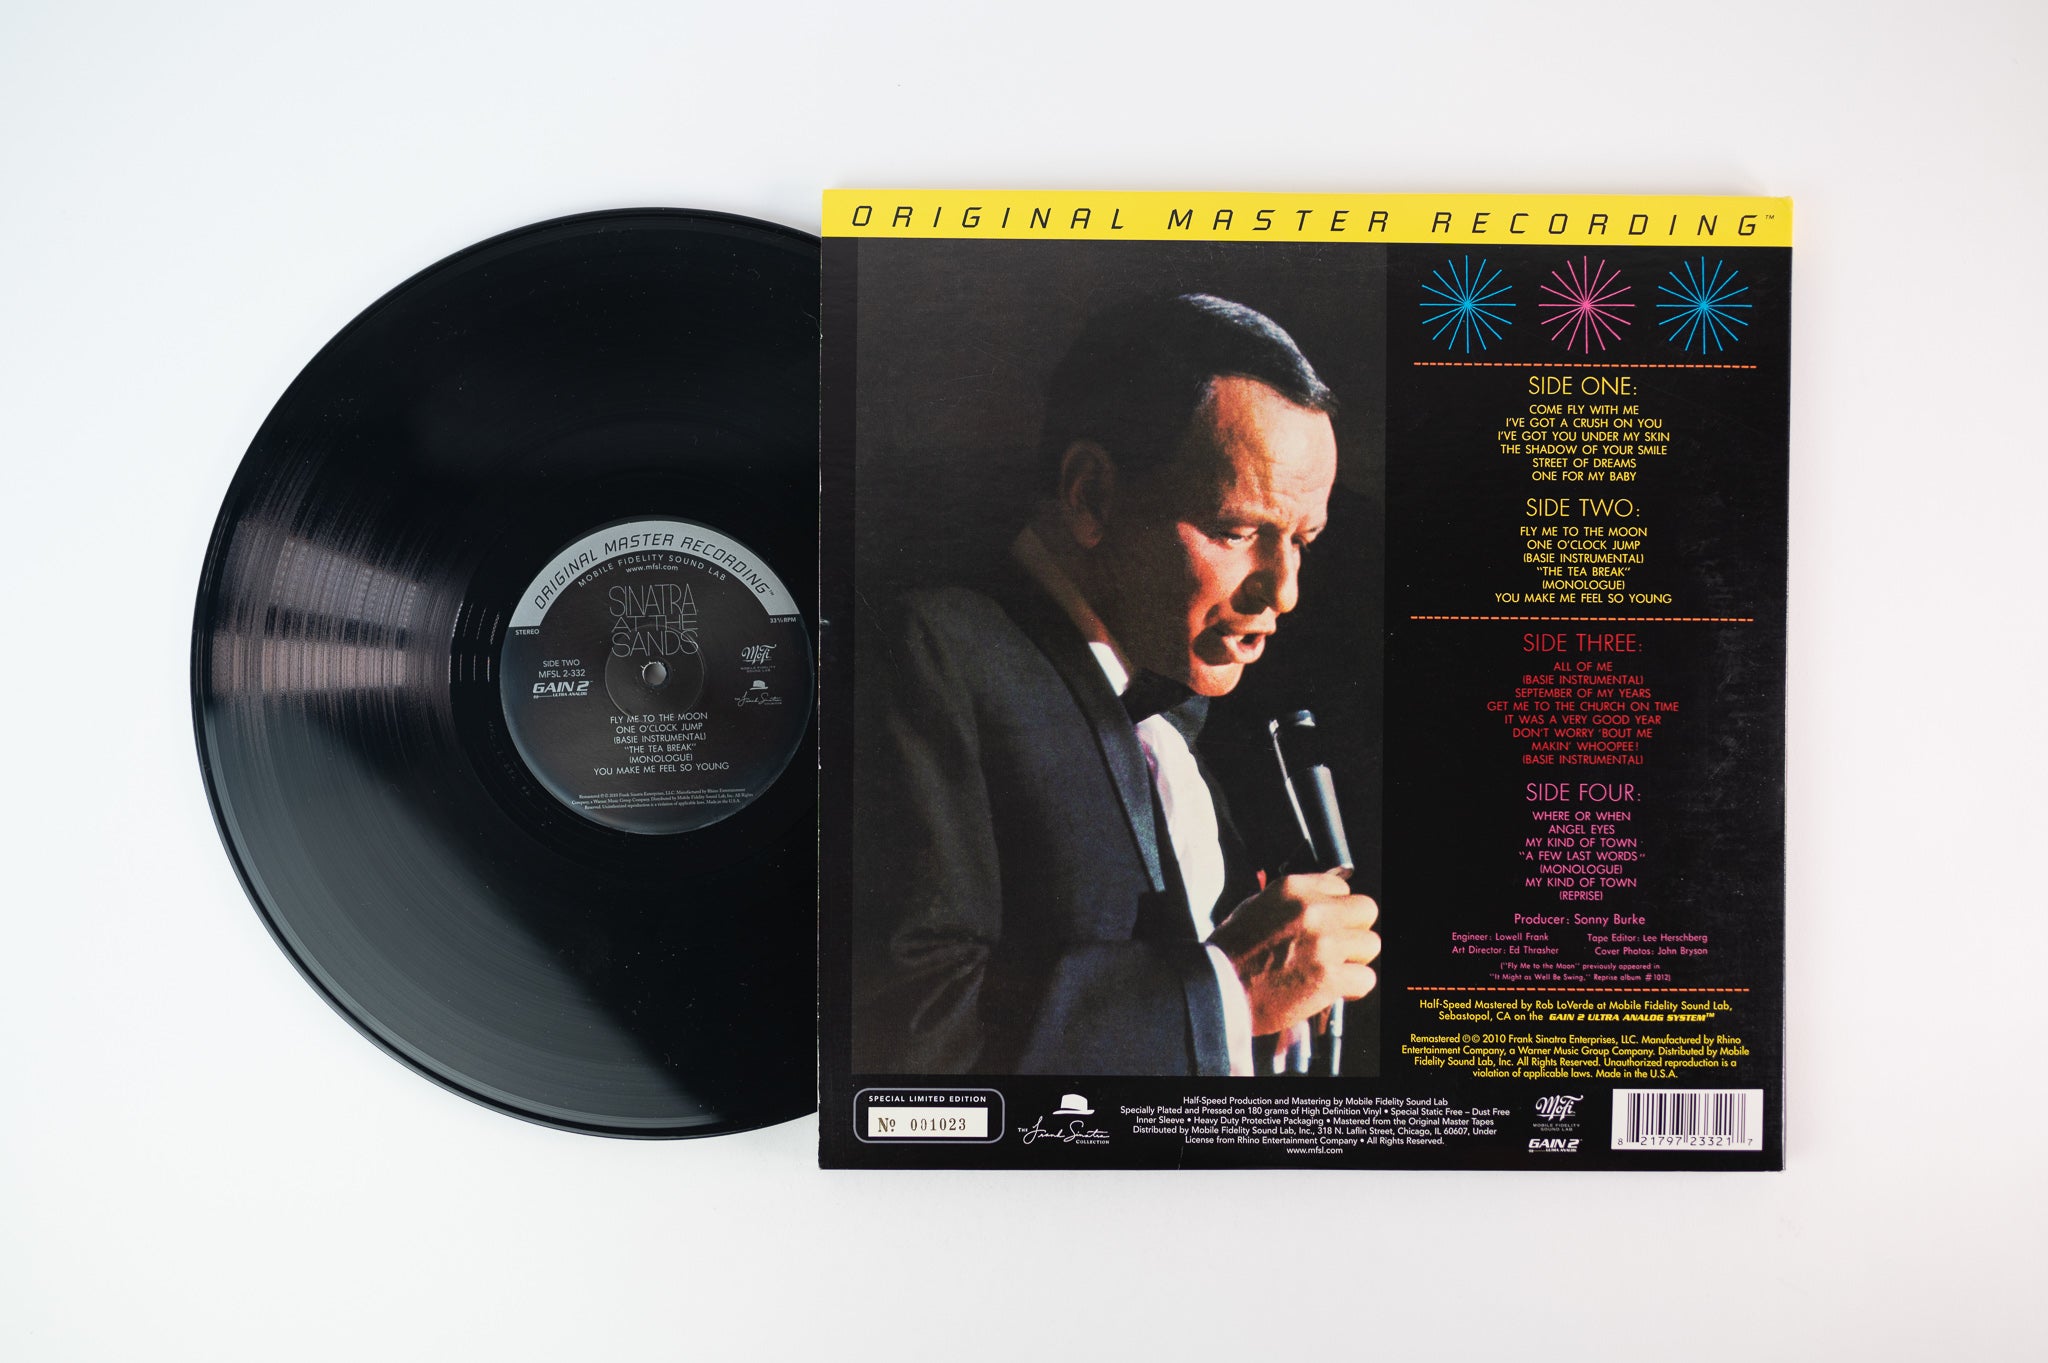 Frank Sinatra & Count Basie - Sinatra At The Sands on Mobile Fidelity Sound Lab Limited Numbered Audiophile Reissue